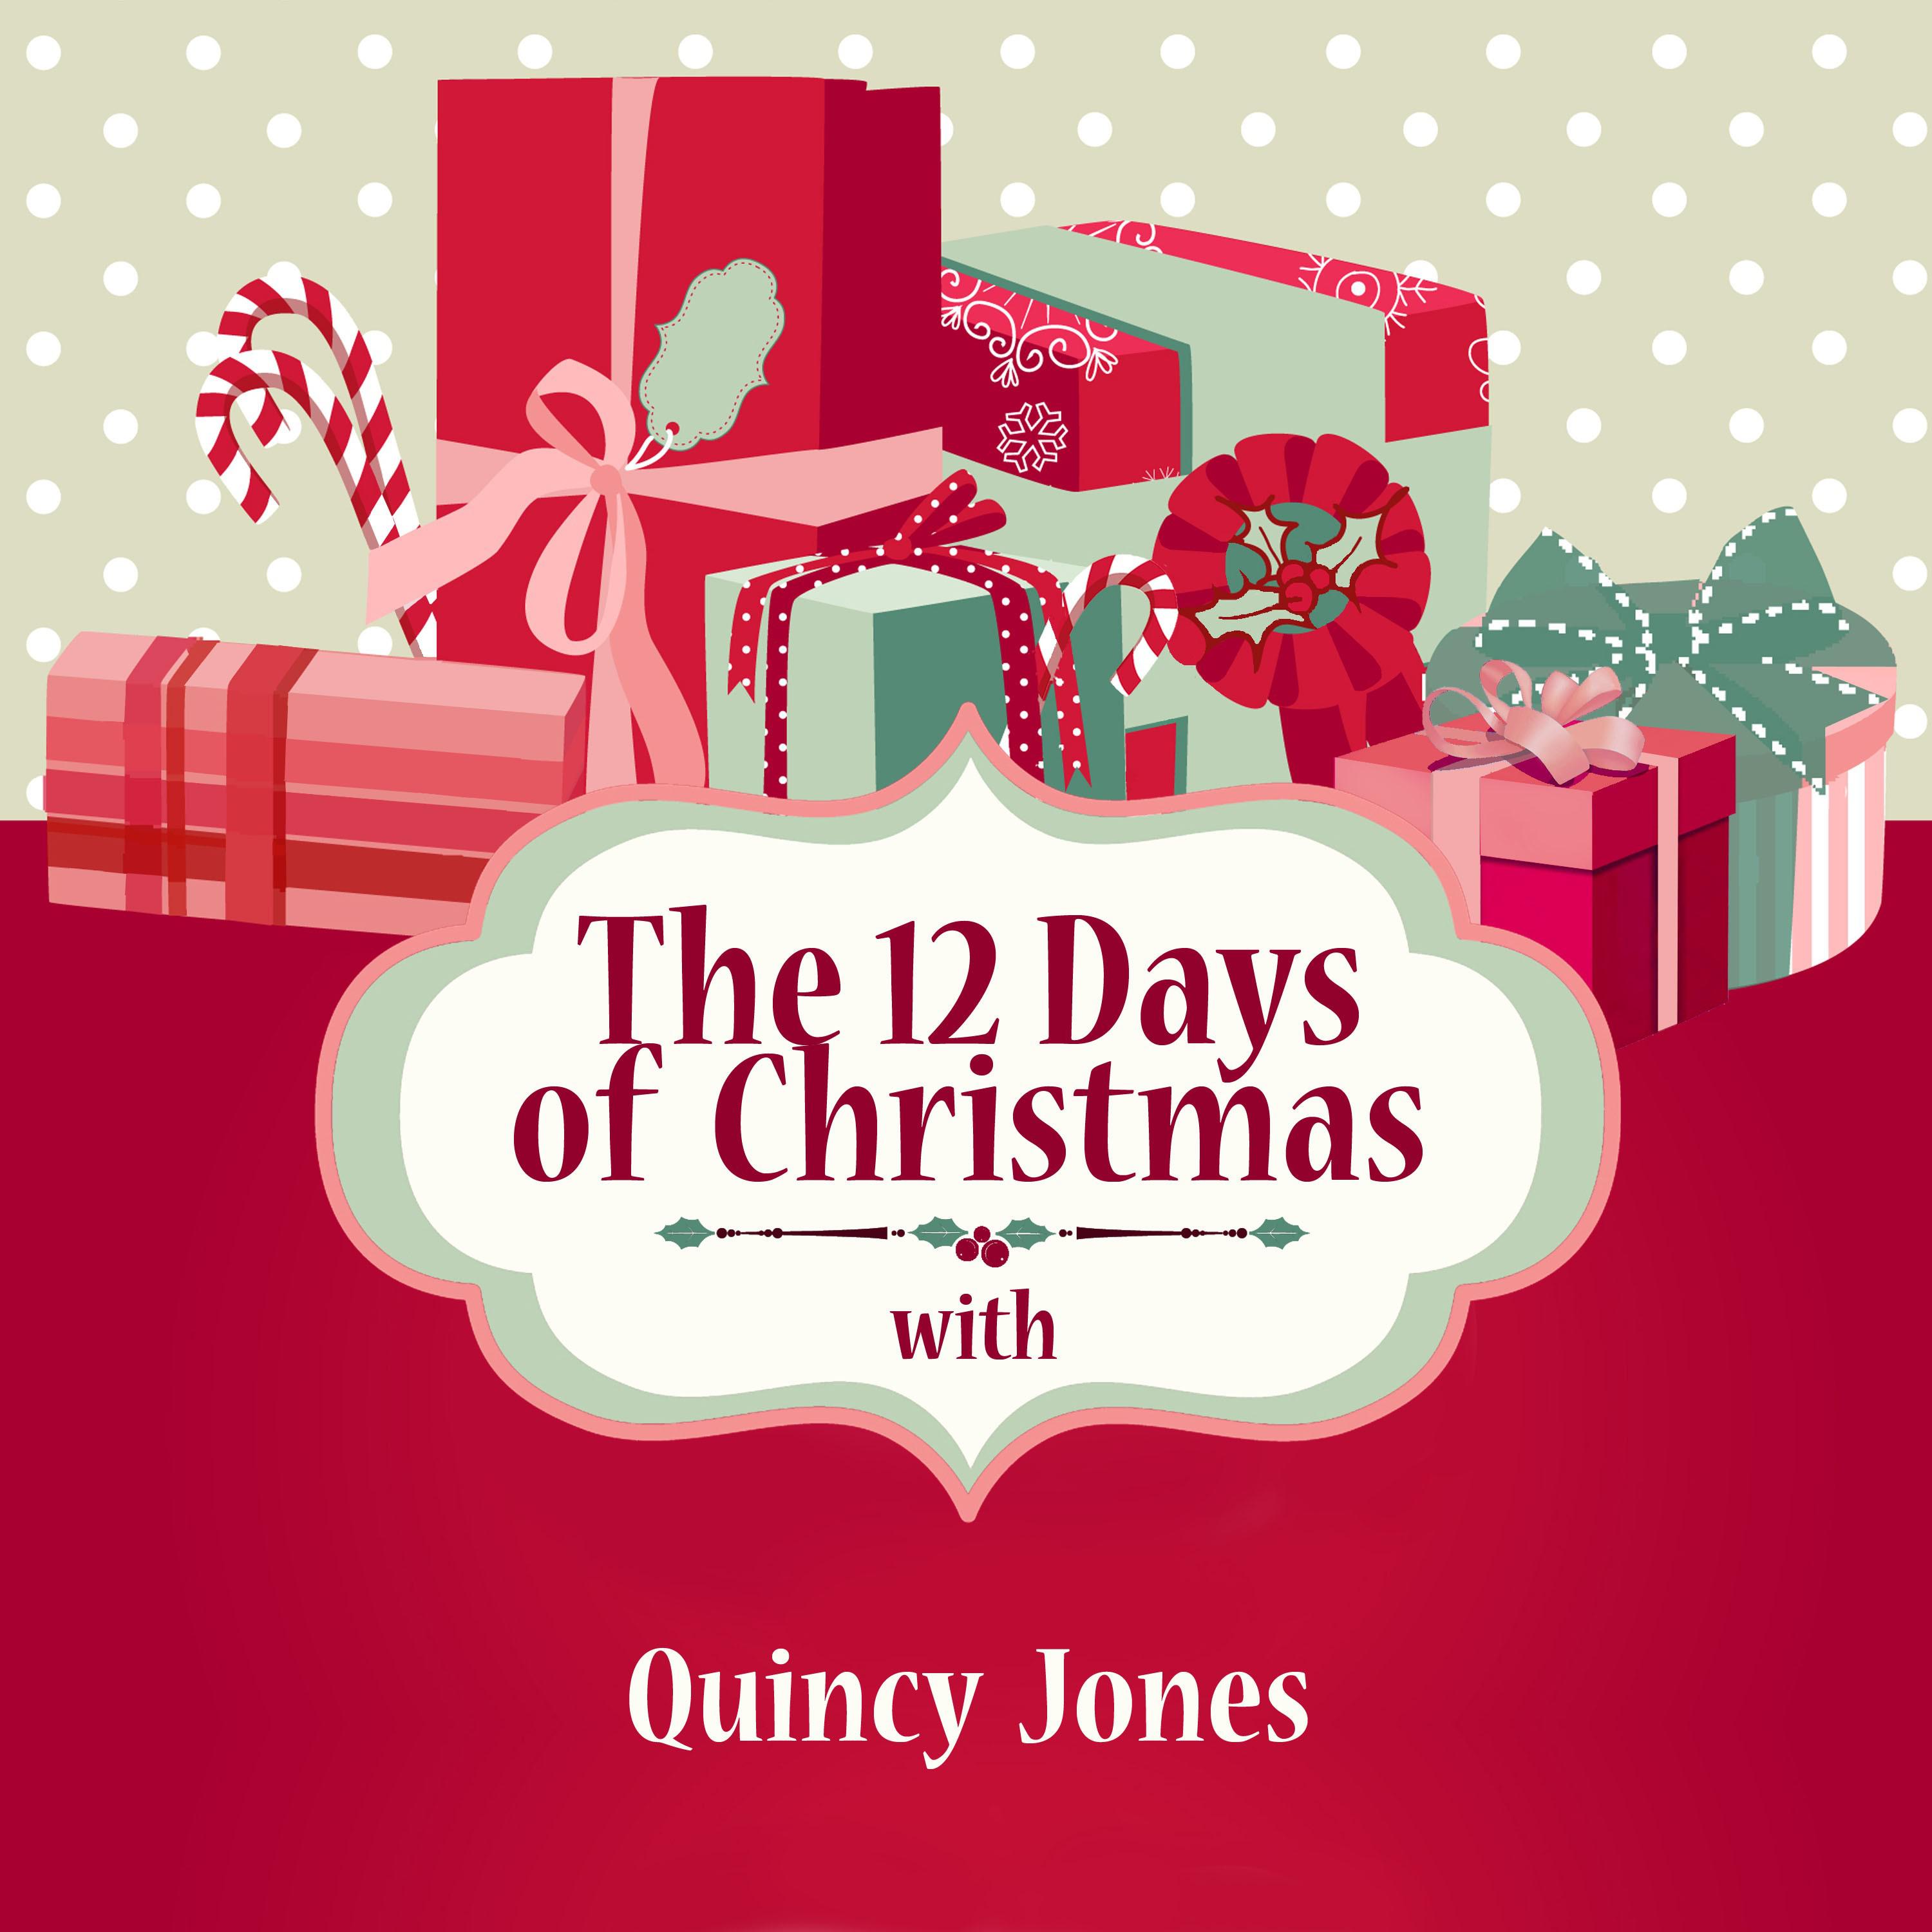 The 12 Days of Christmas with Quincy Jones